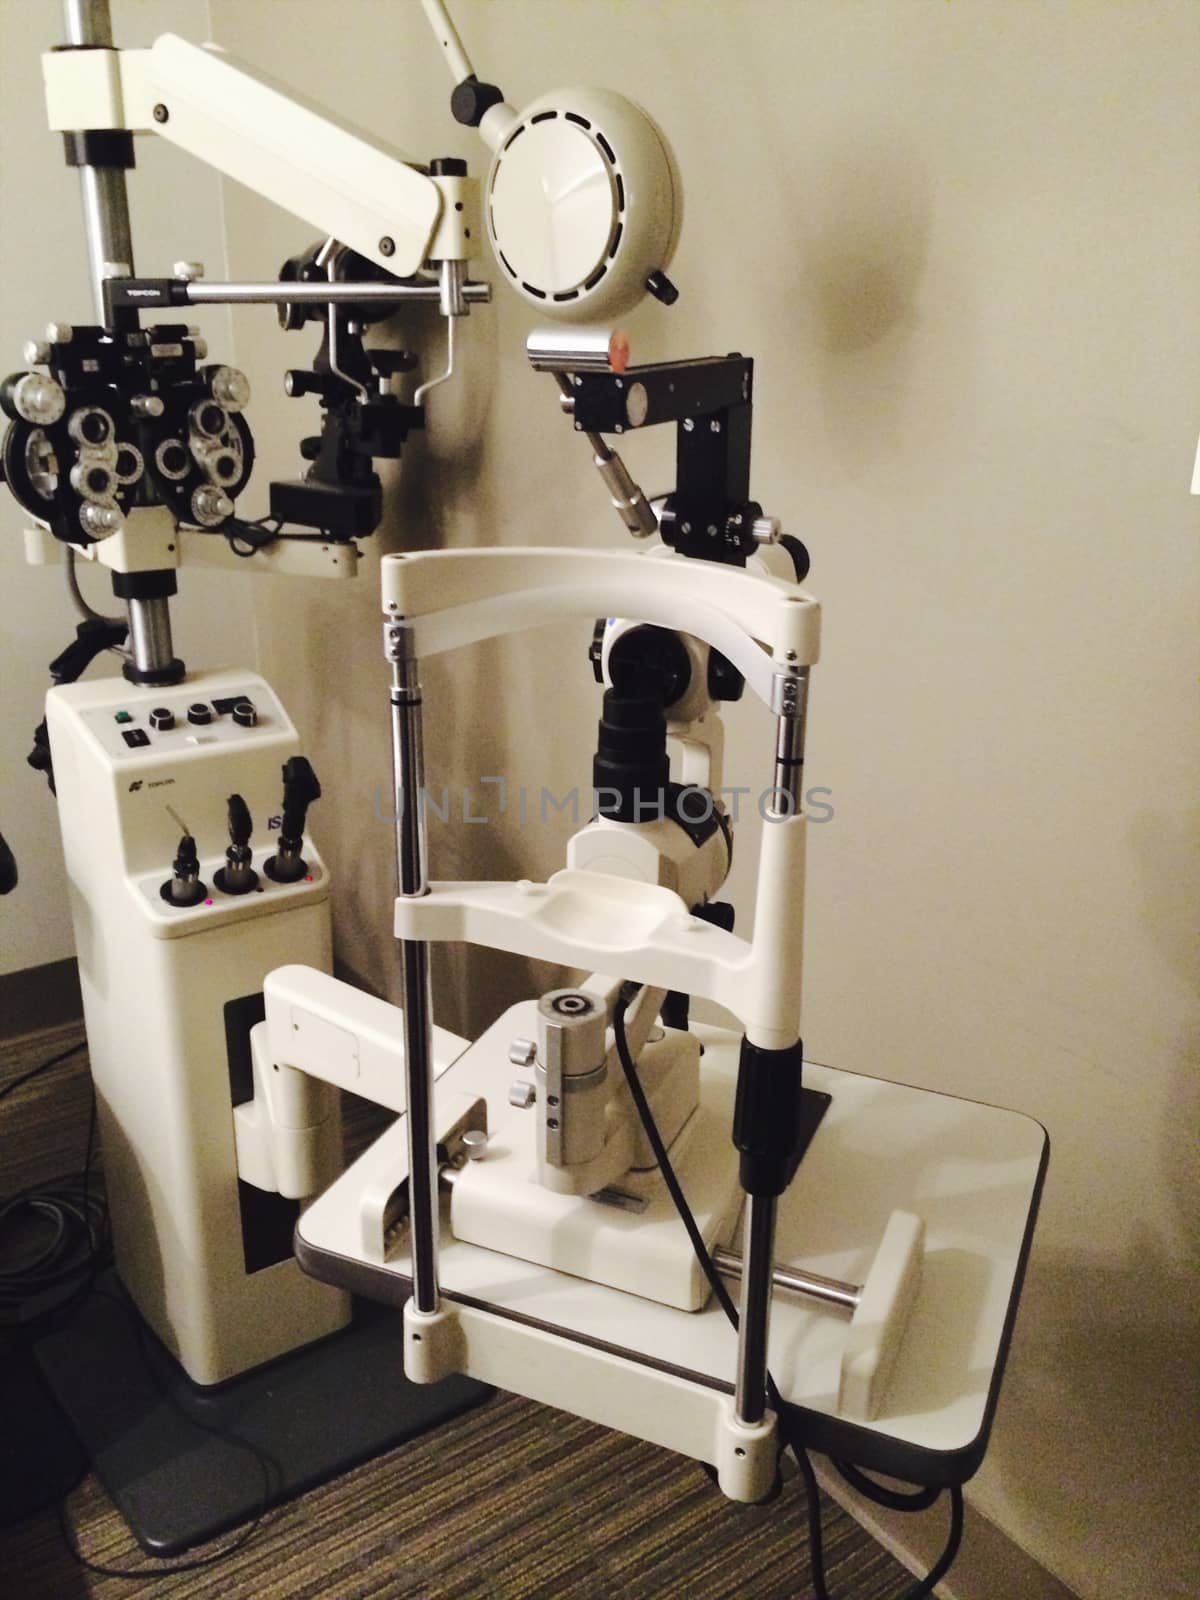 Equipment for a eye test, health care for glasses or contacts